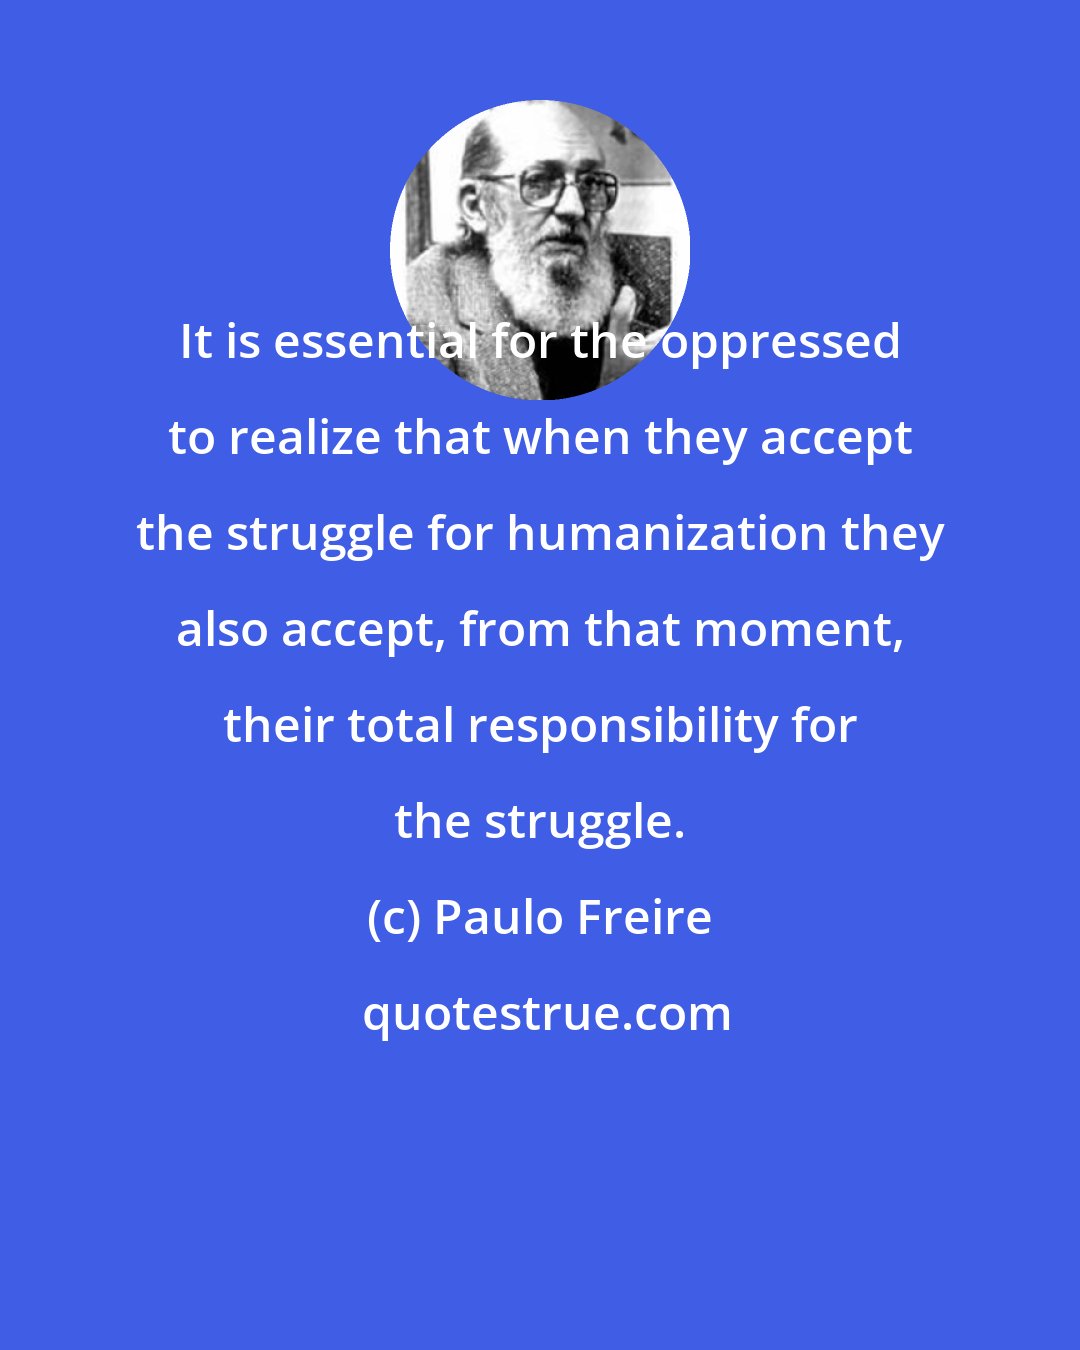 Paulo Freire: It is essential for the oppressed to realize that when they accept the struggle for humanization they also accept, from that moment, their total responsibility for the struggle.